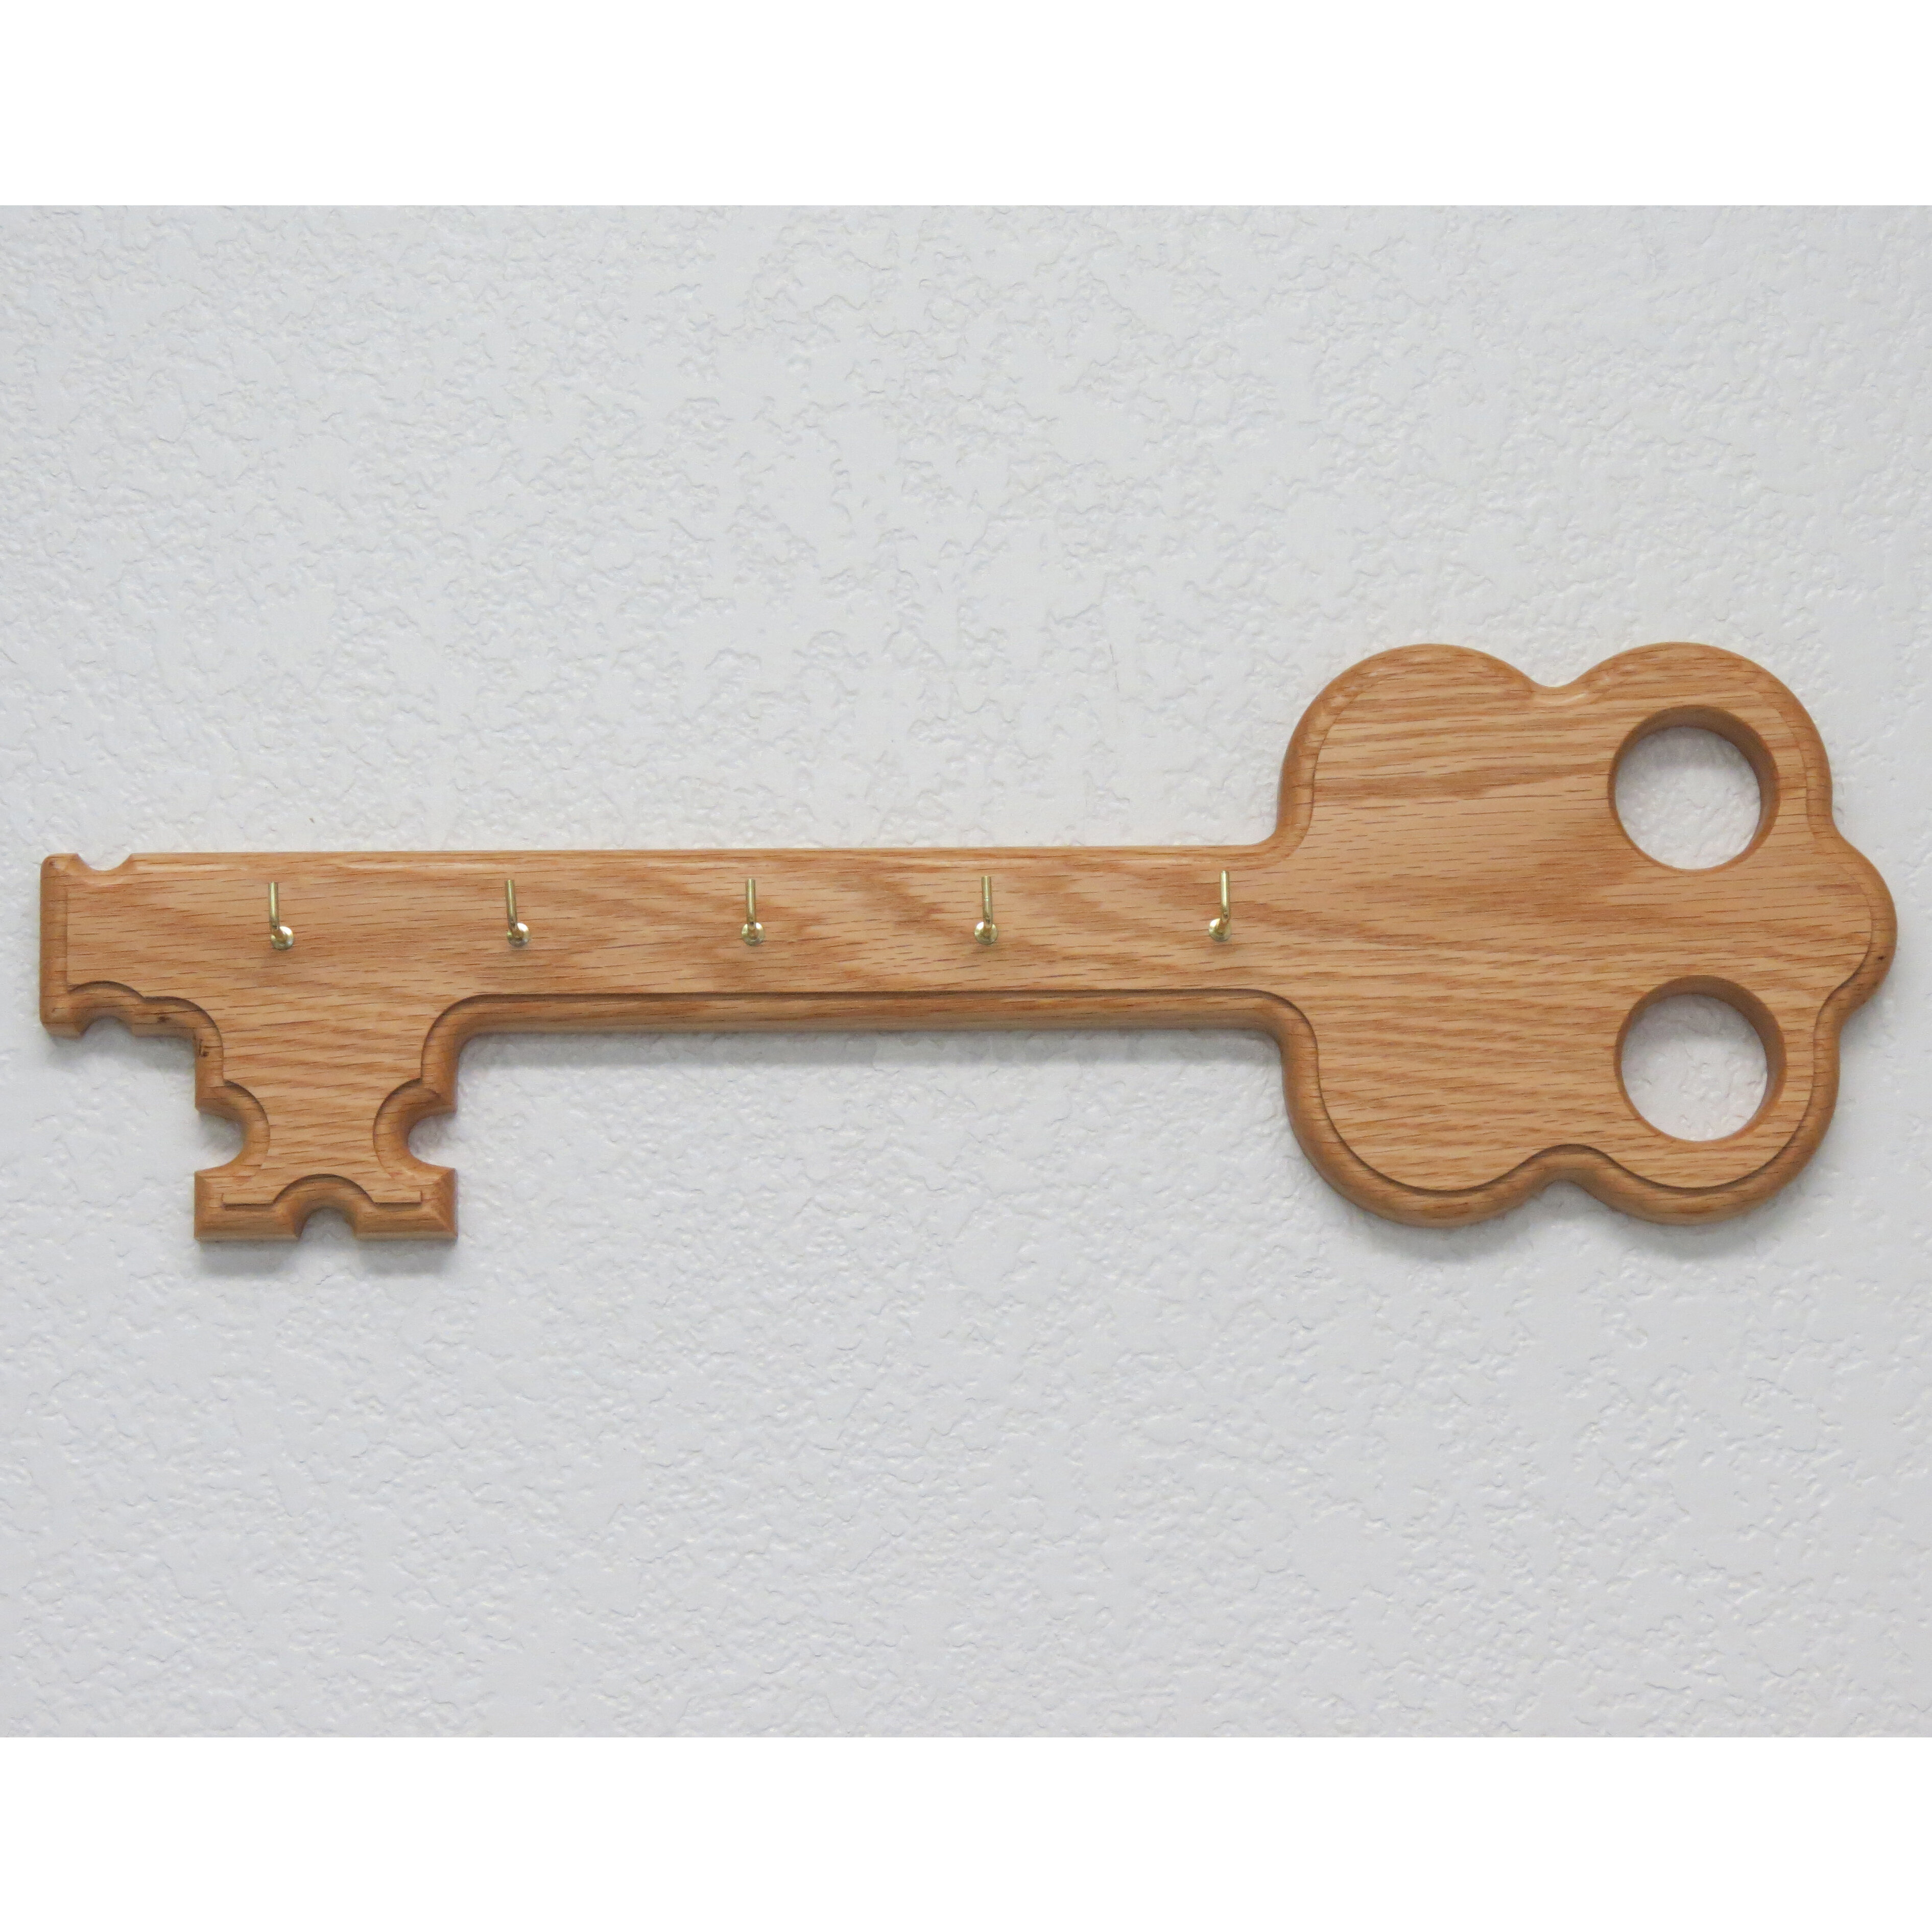 Personalized Carved Wall Mounted Key Holder Solid Wood Key Rack Holder 